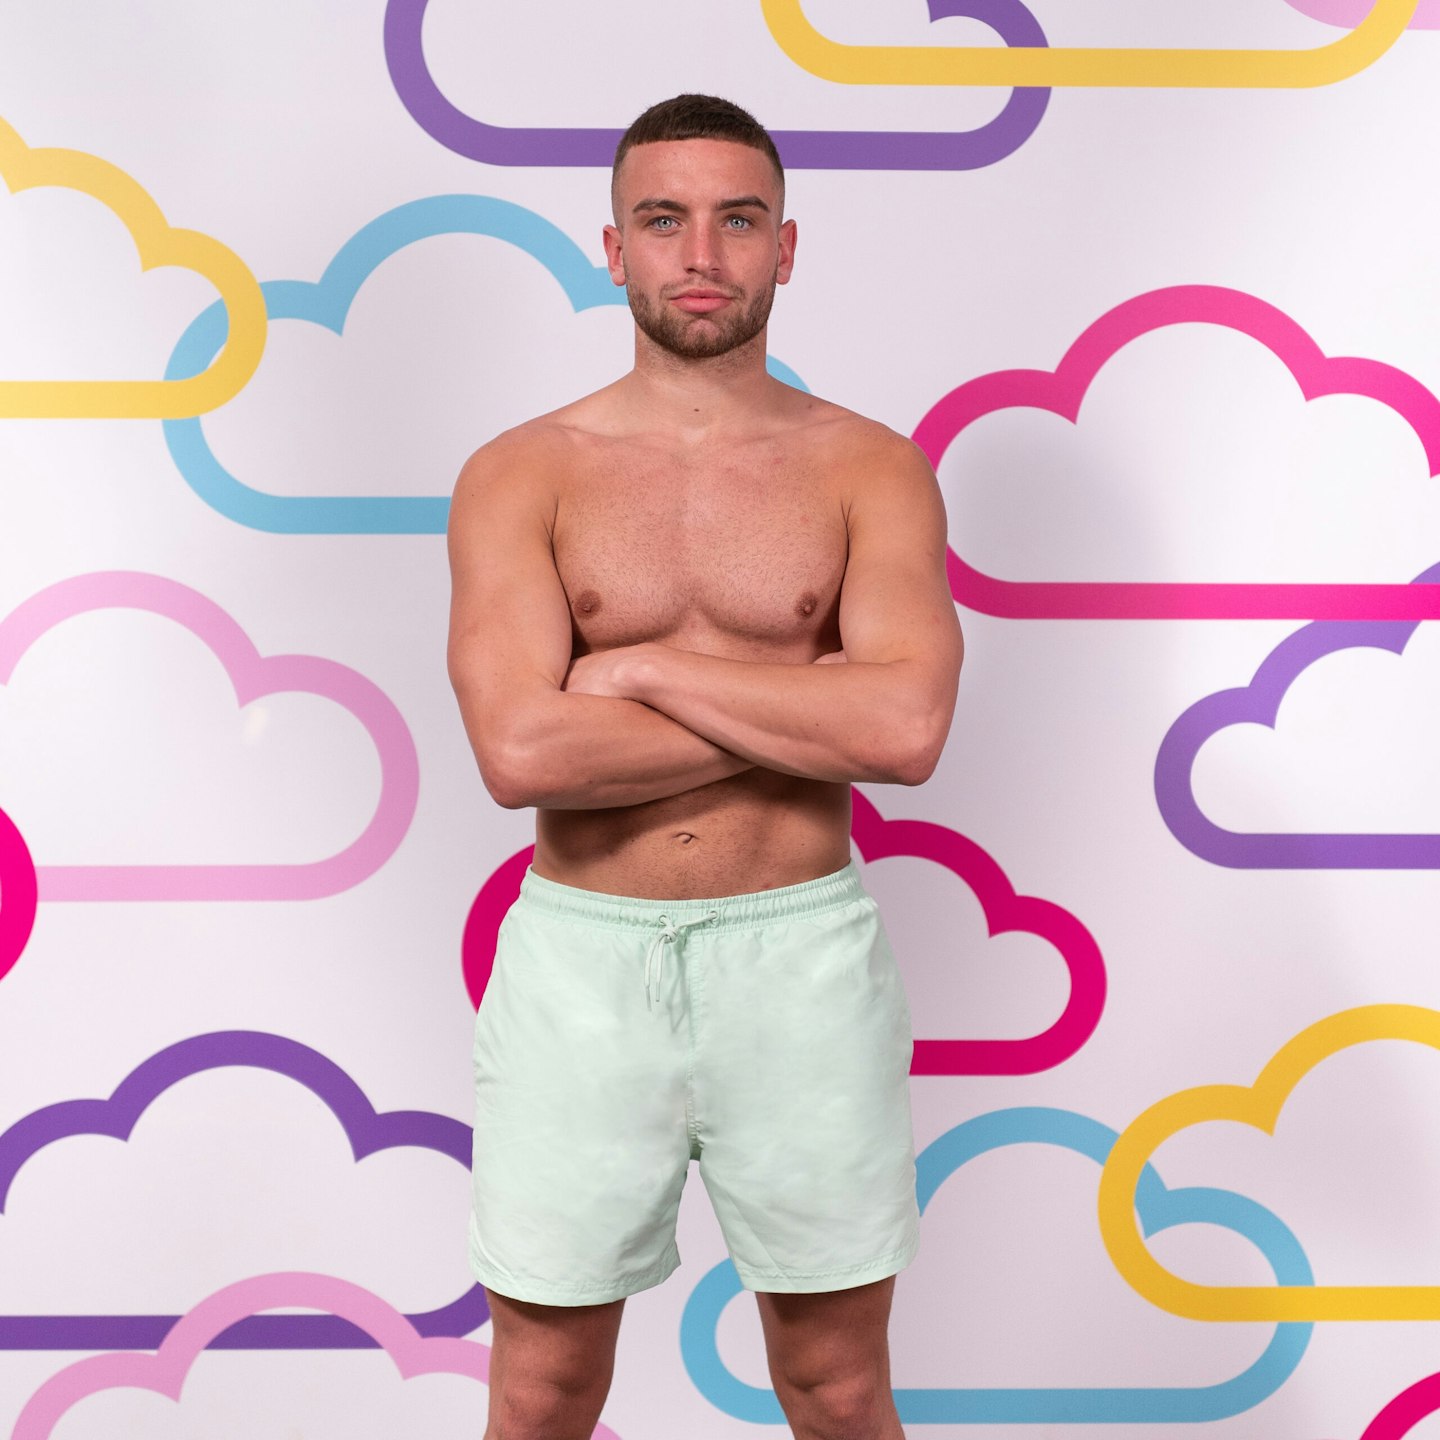 Kain Reed posing in front of a white background with multi-coloured clouds